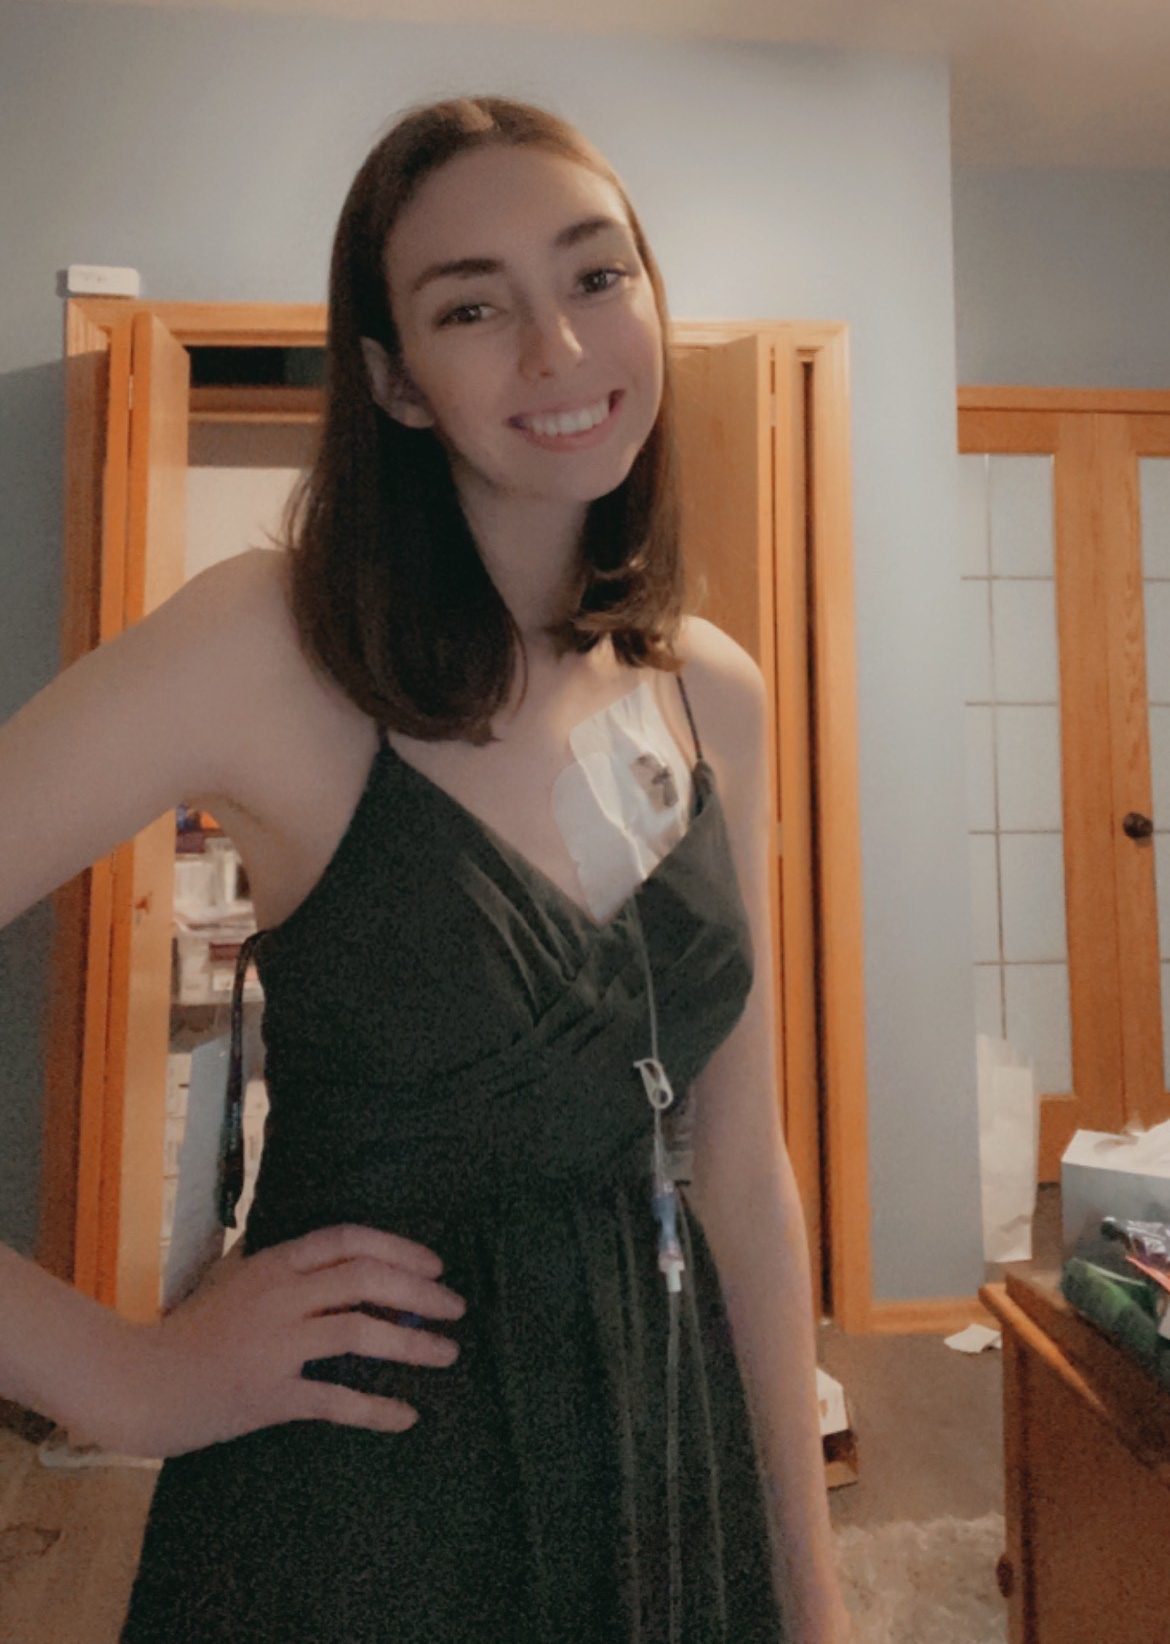 Taylor stands smiling in her room, with a main line port on her chest